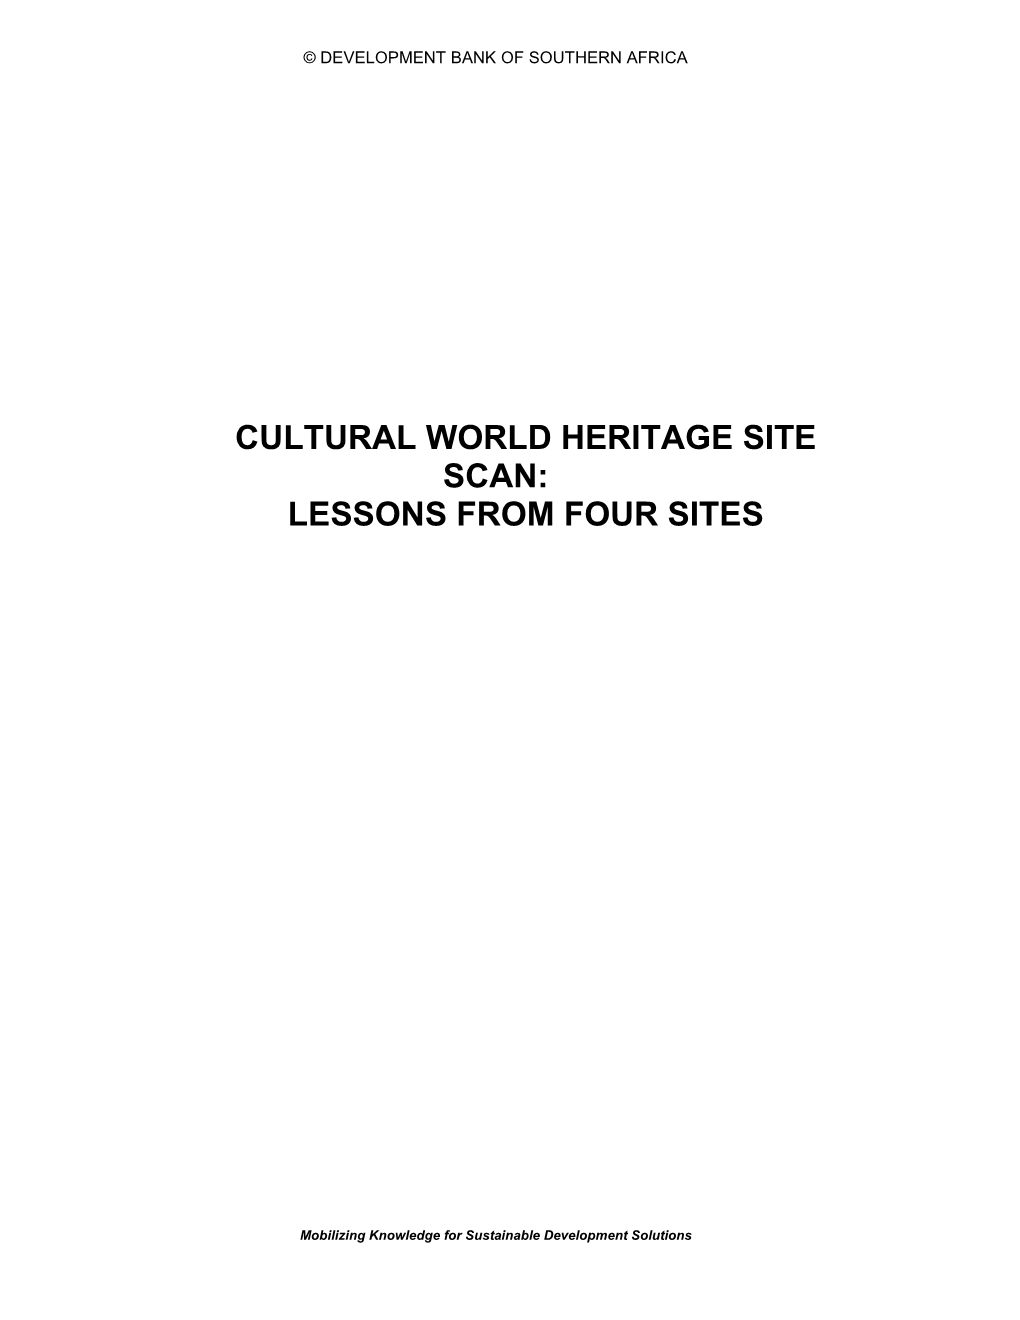 Cultural World Heritage Site Scan: Lessons from Four Sites